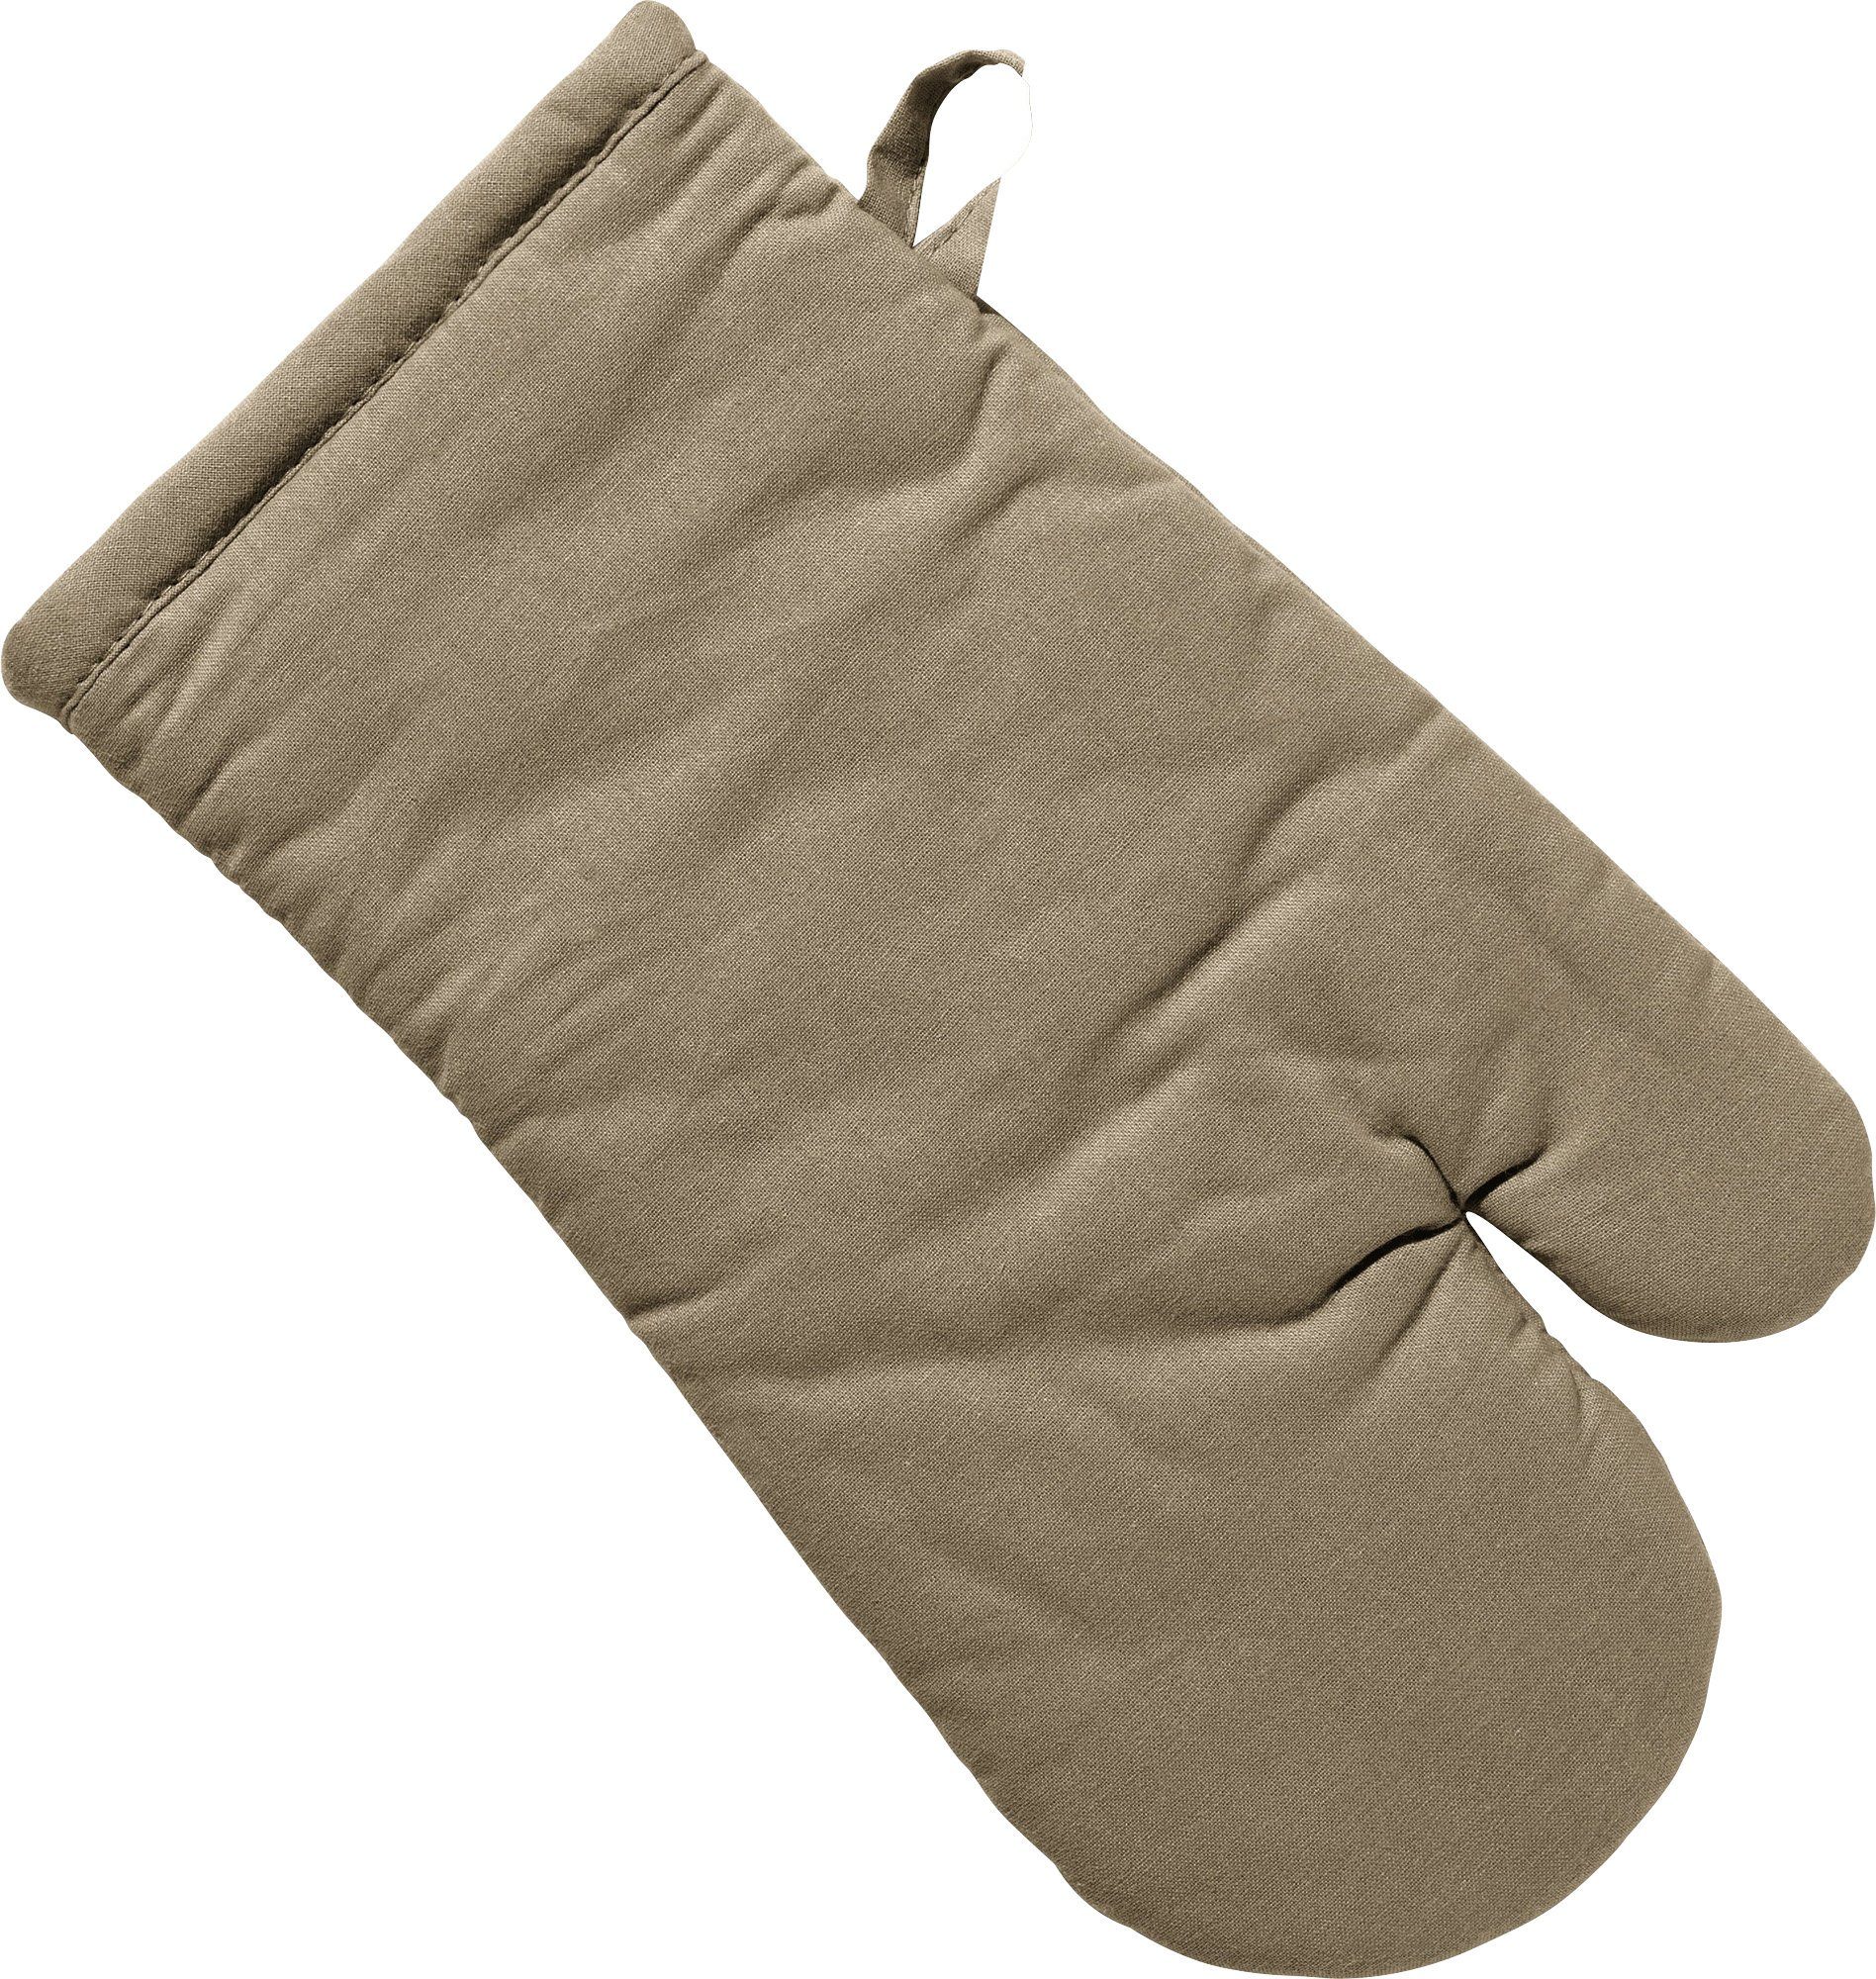 REDBEST Topflappen Ofenhandschuh "Seattle", (1-tlg), Uni taupe